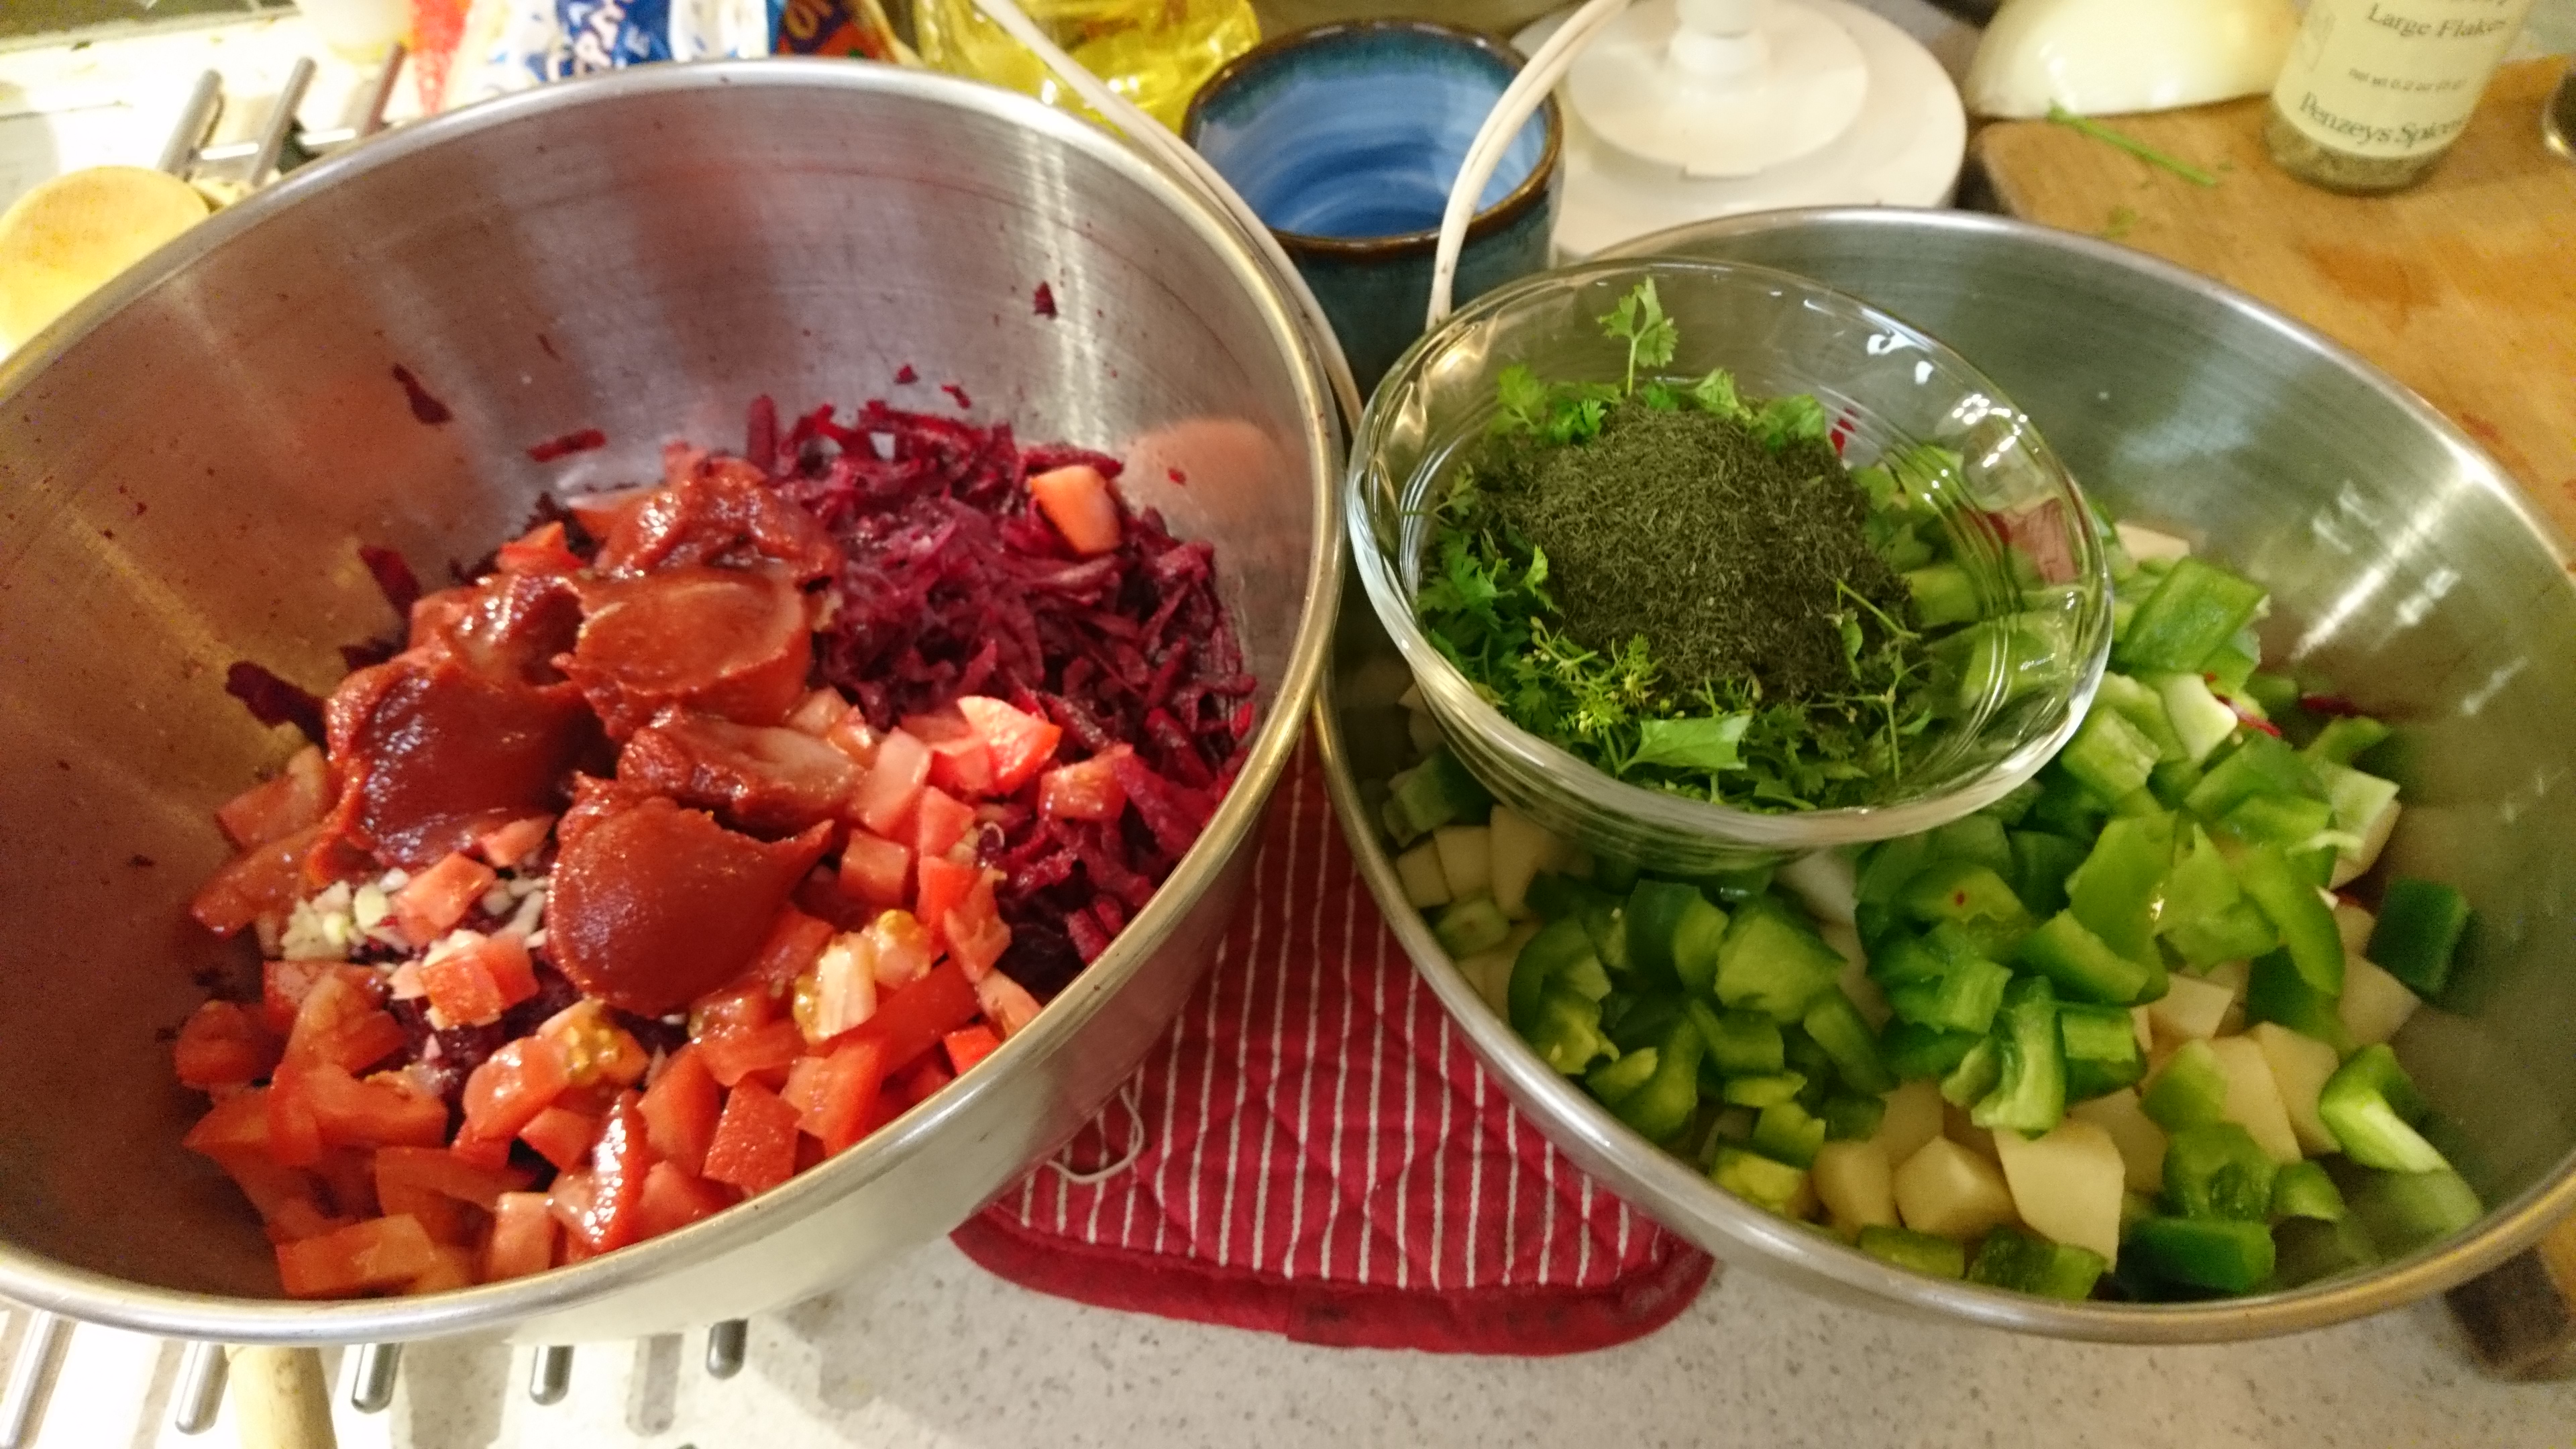 prep bowls for borscht; left one contains beets and other red ingredients, right one has green peppers and potatoes